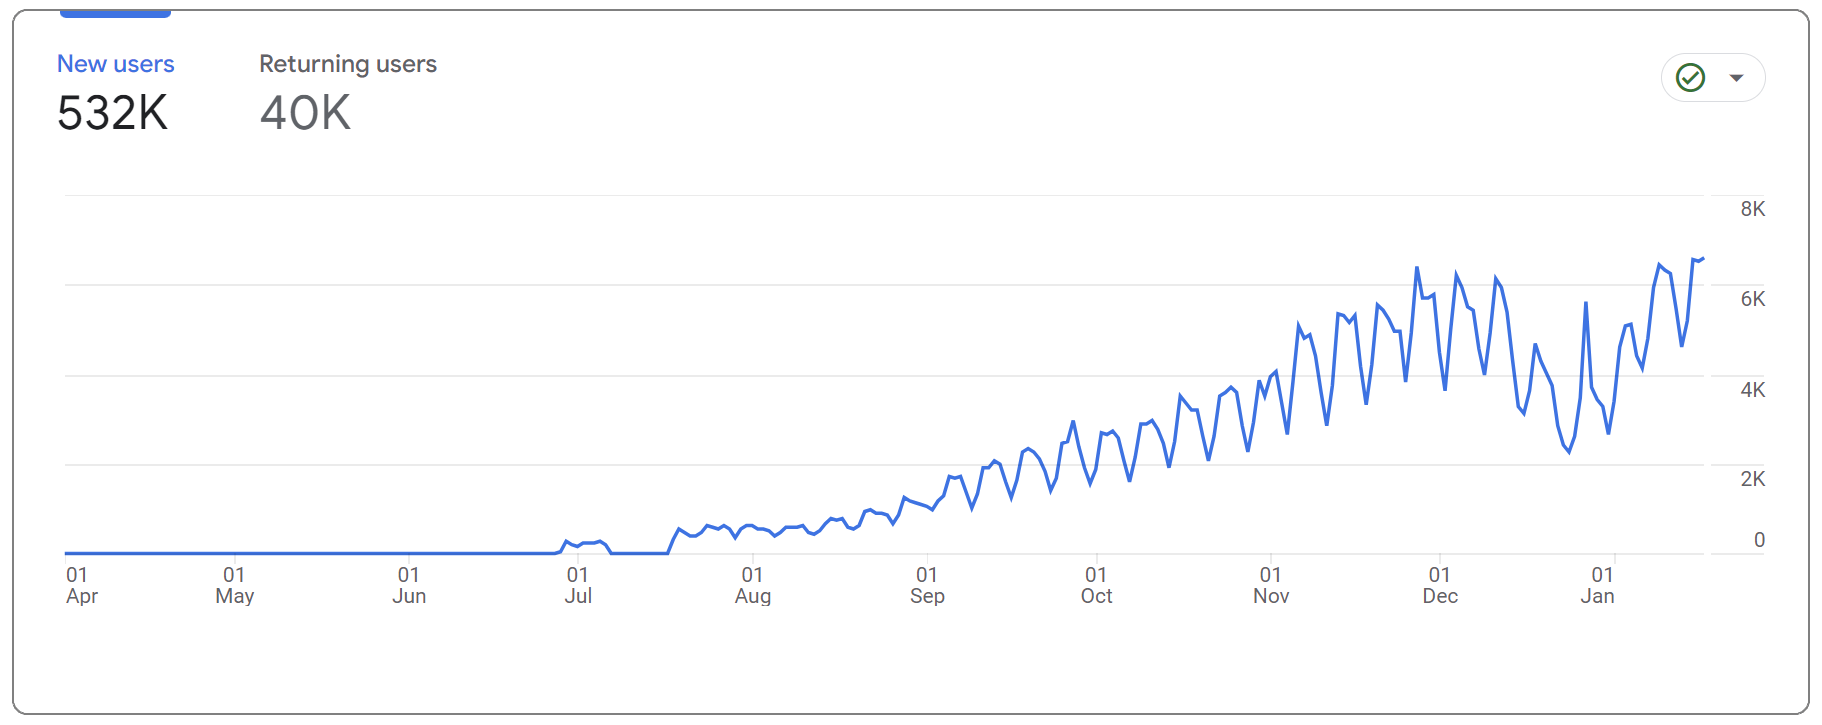 A graph showing the growth of new users metric in Google Analytics 4